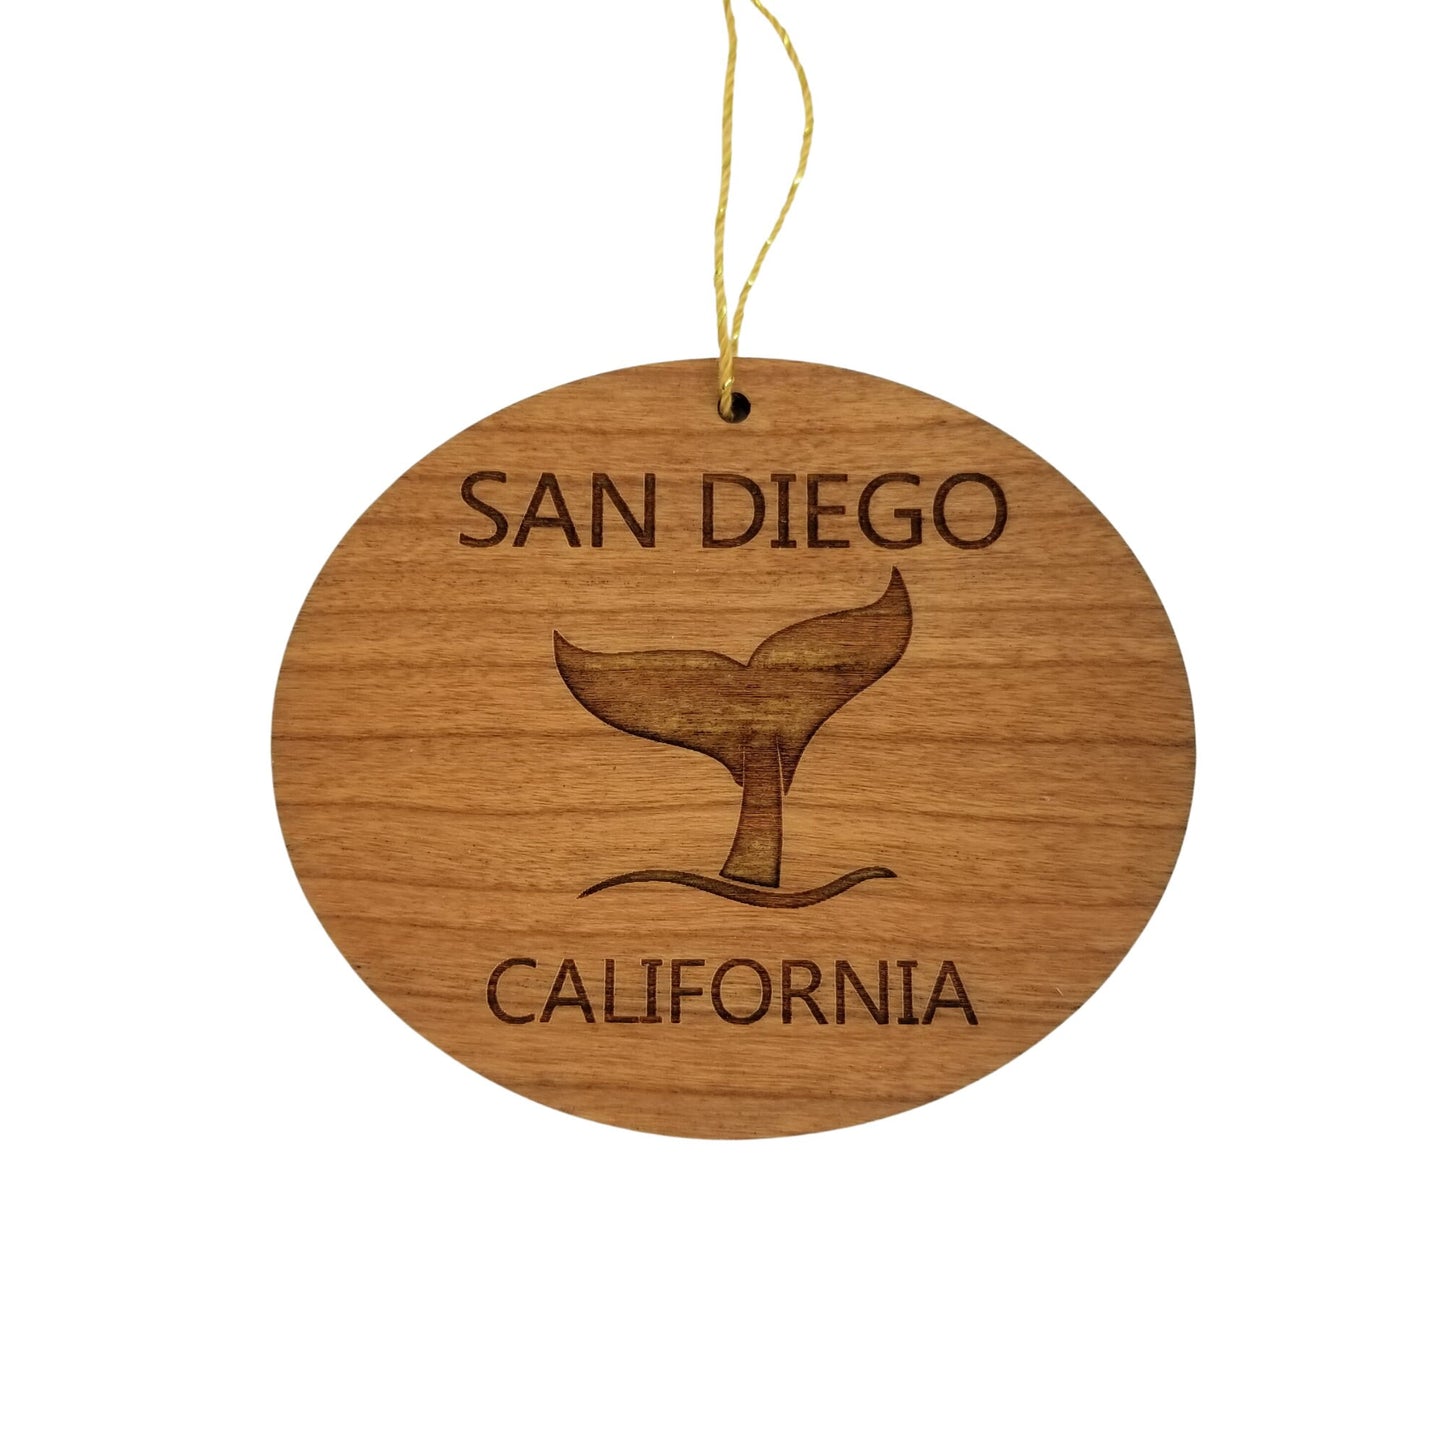 San Diego Ornament - Handmade Wood Ornament - California Whale Tail Whale Watching - CA Christmas Ornament 3 Inch